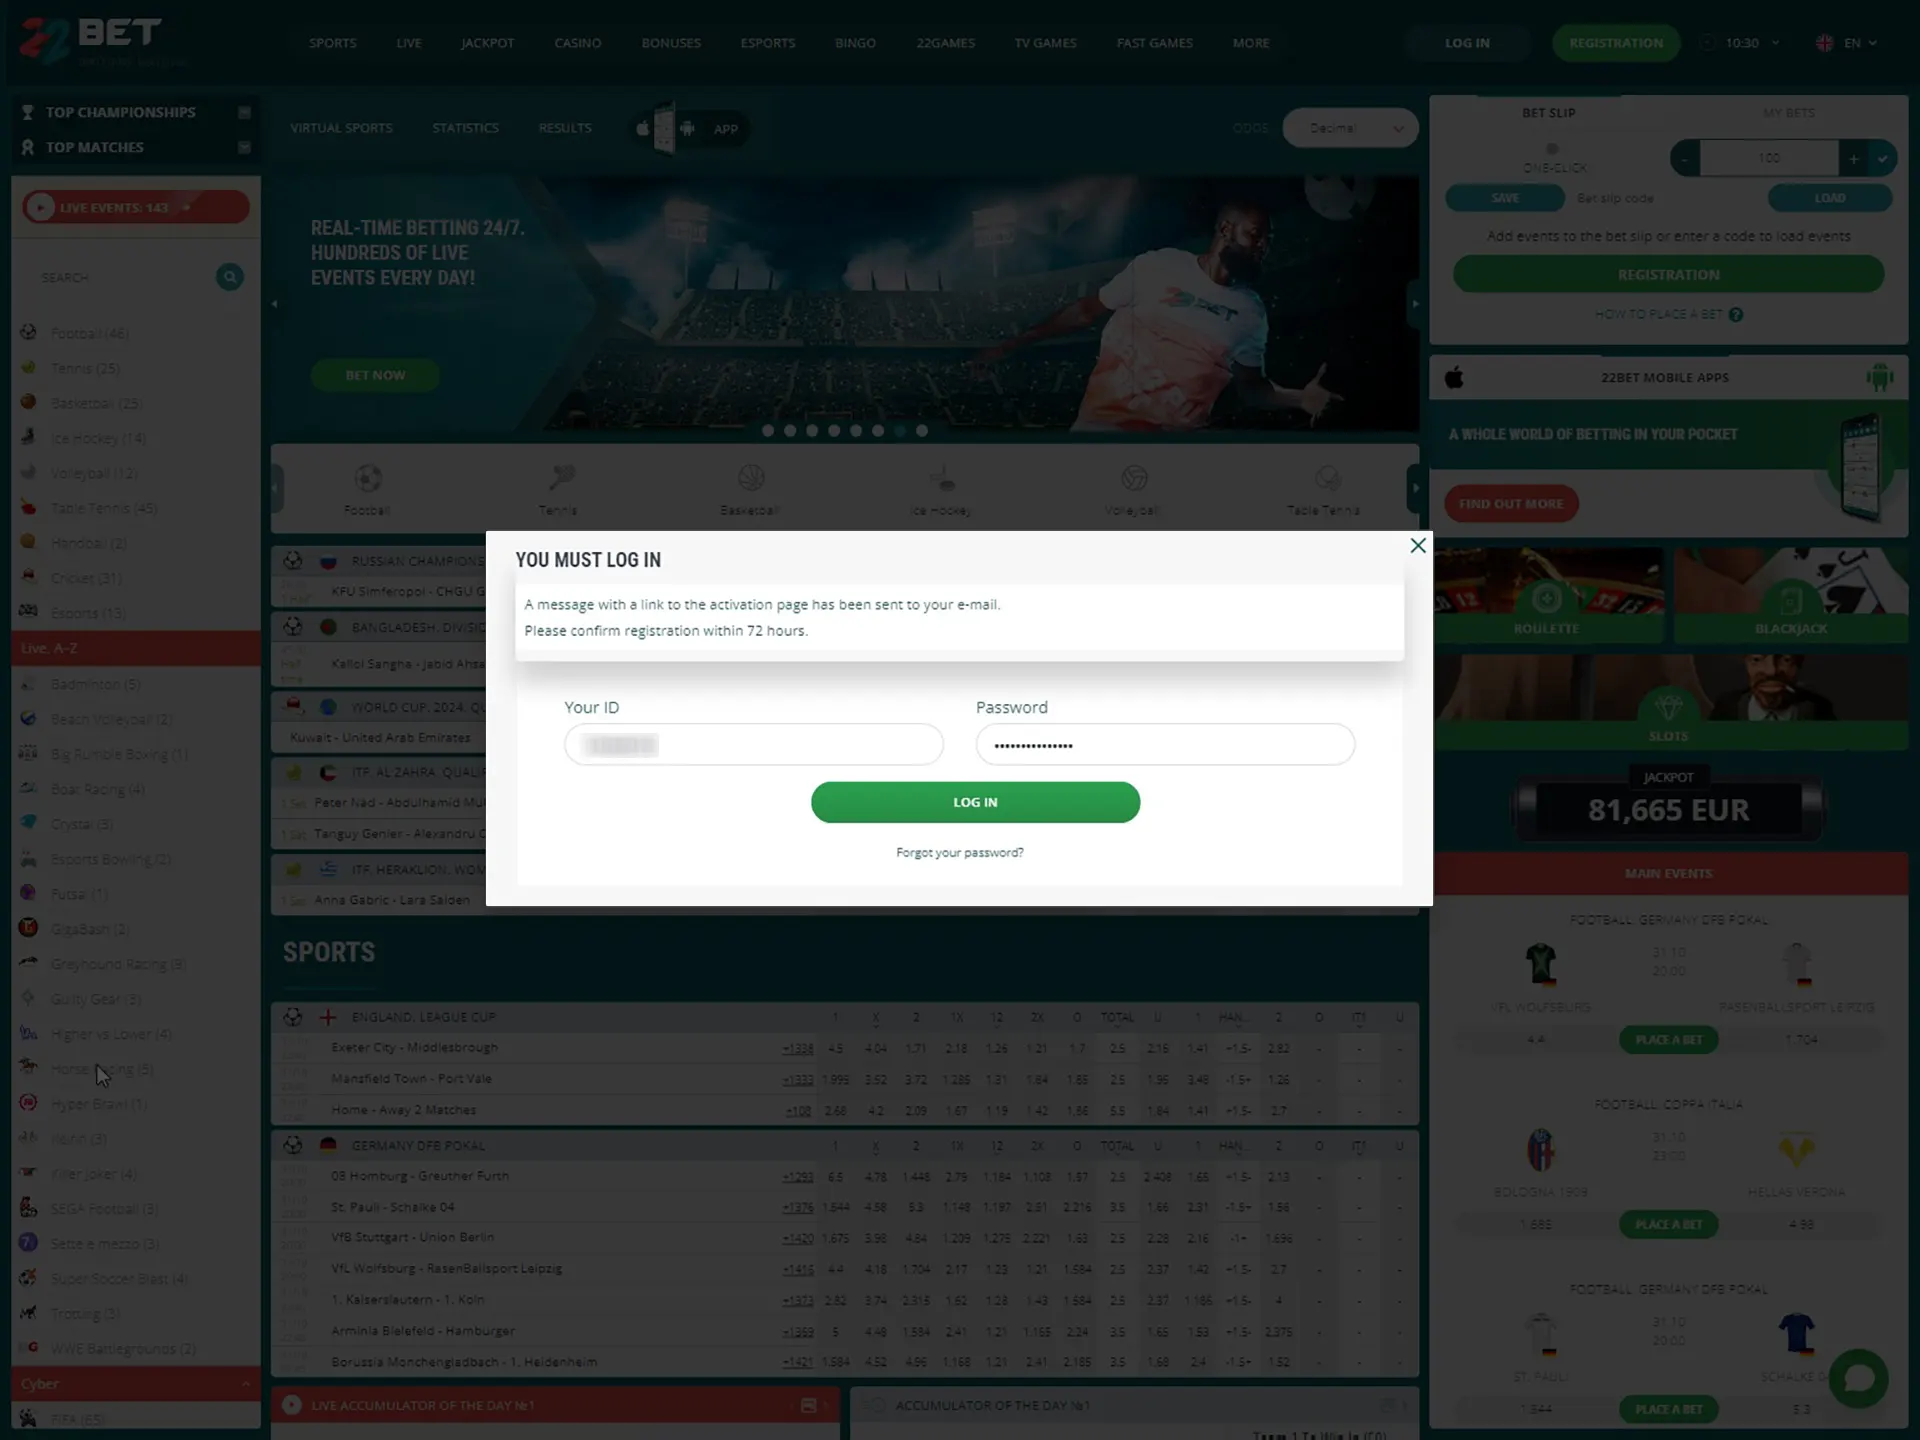 Complete the creation of your 22Bet account.